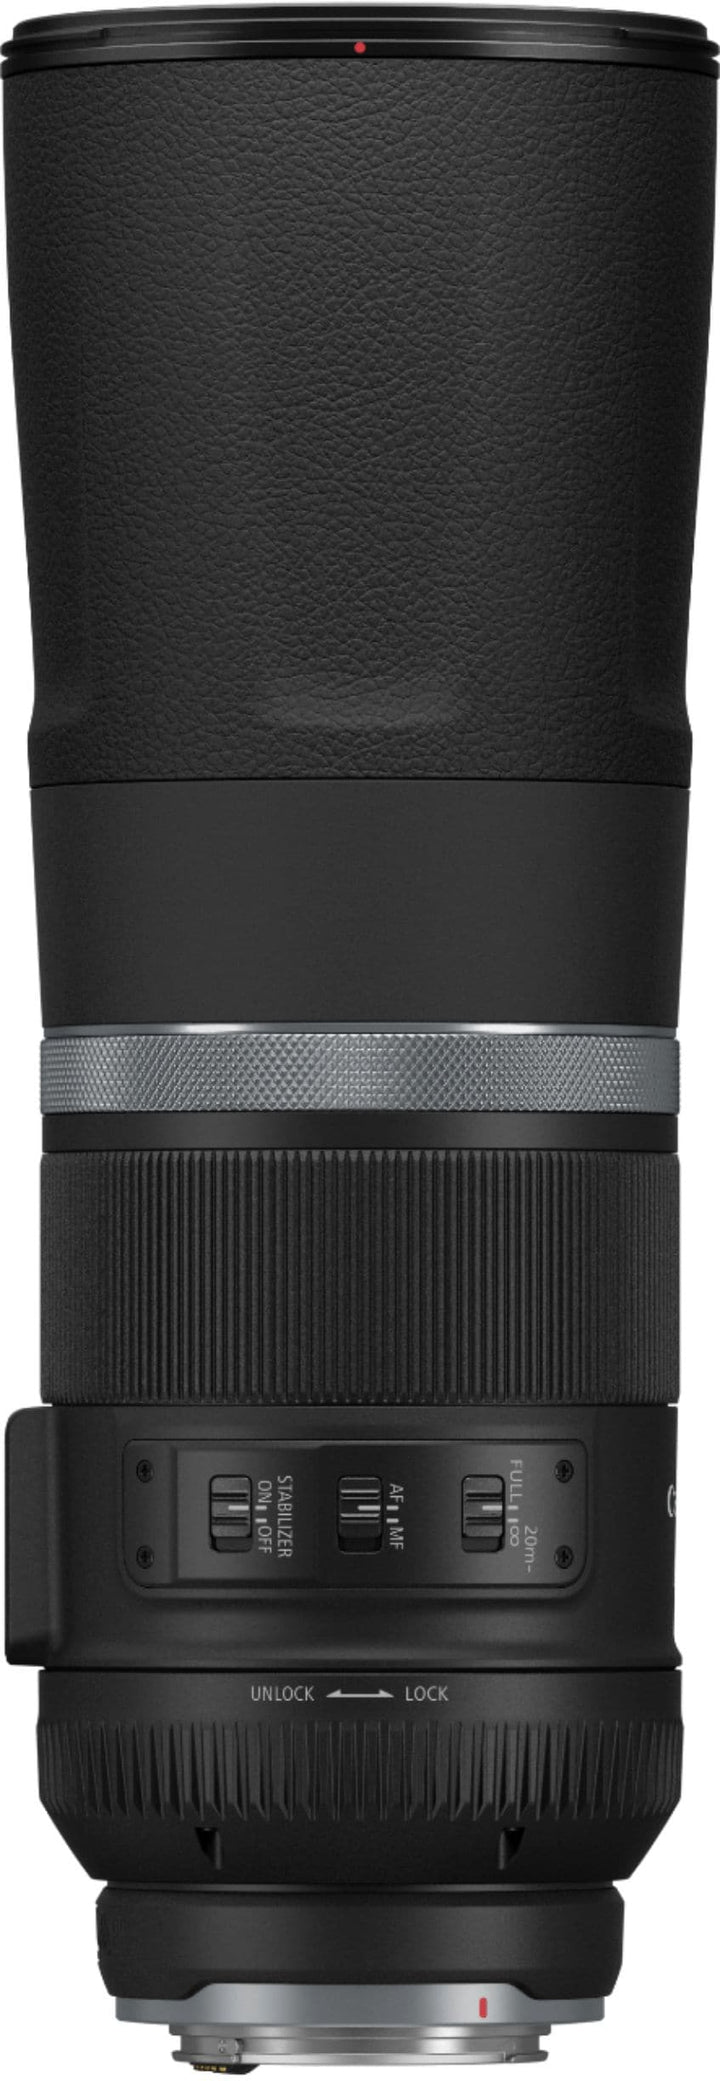 Canon - RF 800mm f/11  IS STM Telephoto Lens for EOS R Cameras - Black_3